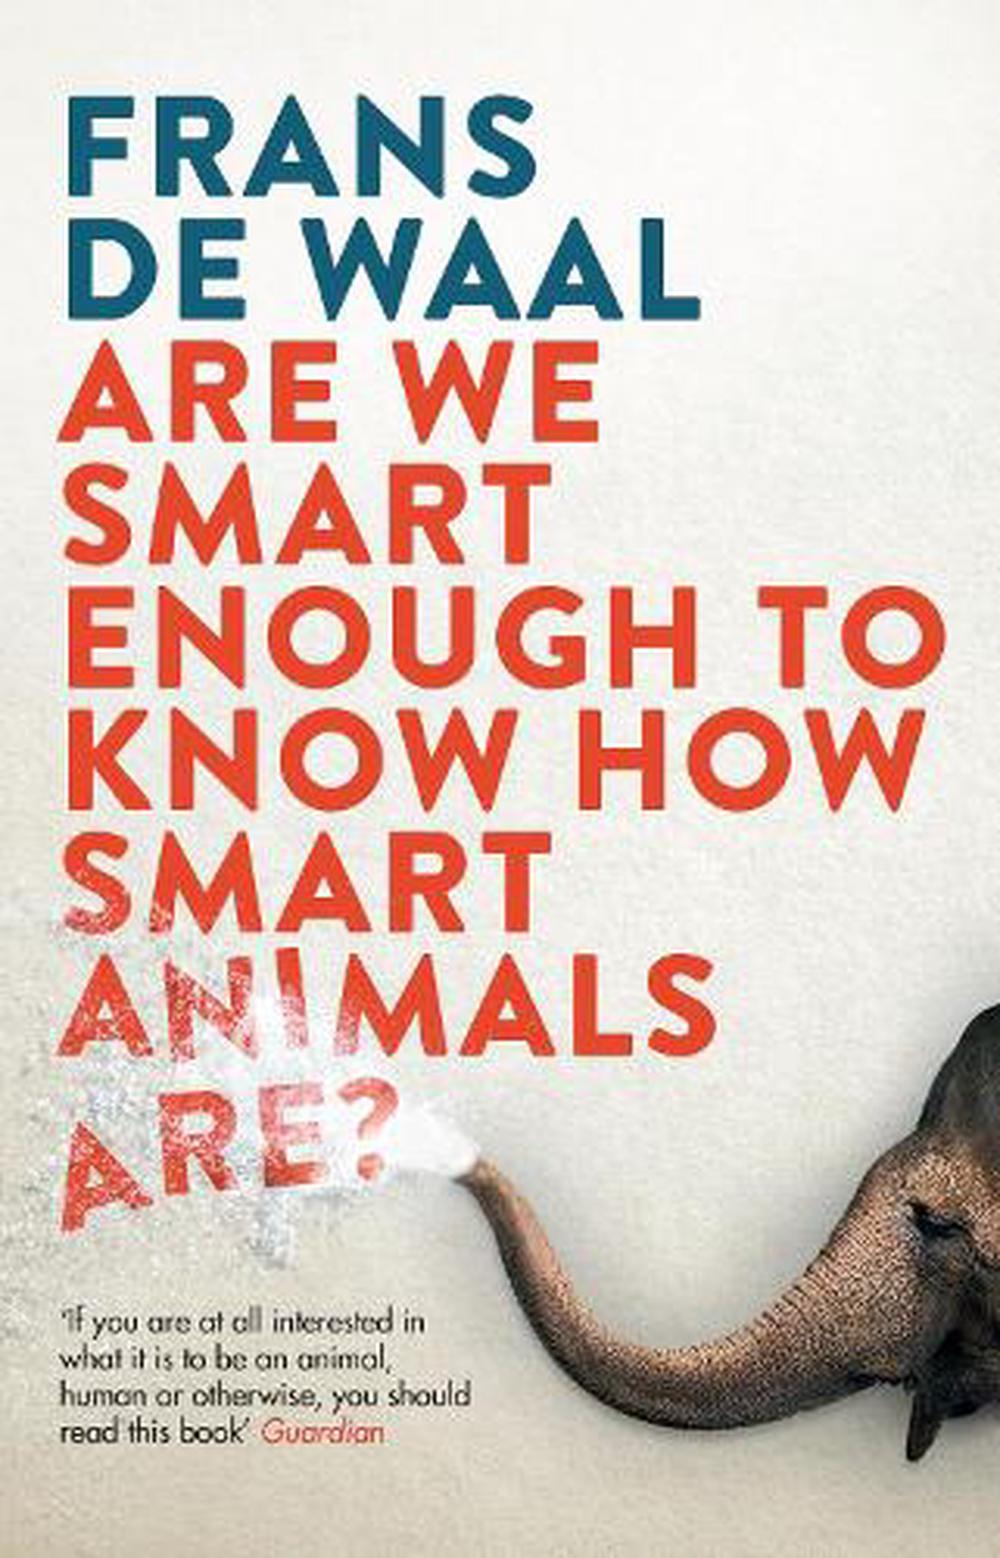 are humans smart enough to know how smart animals are